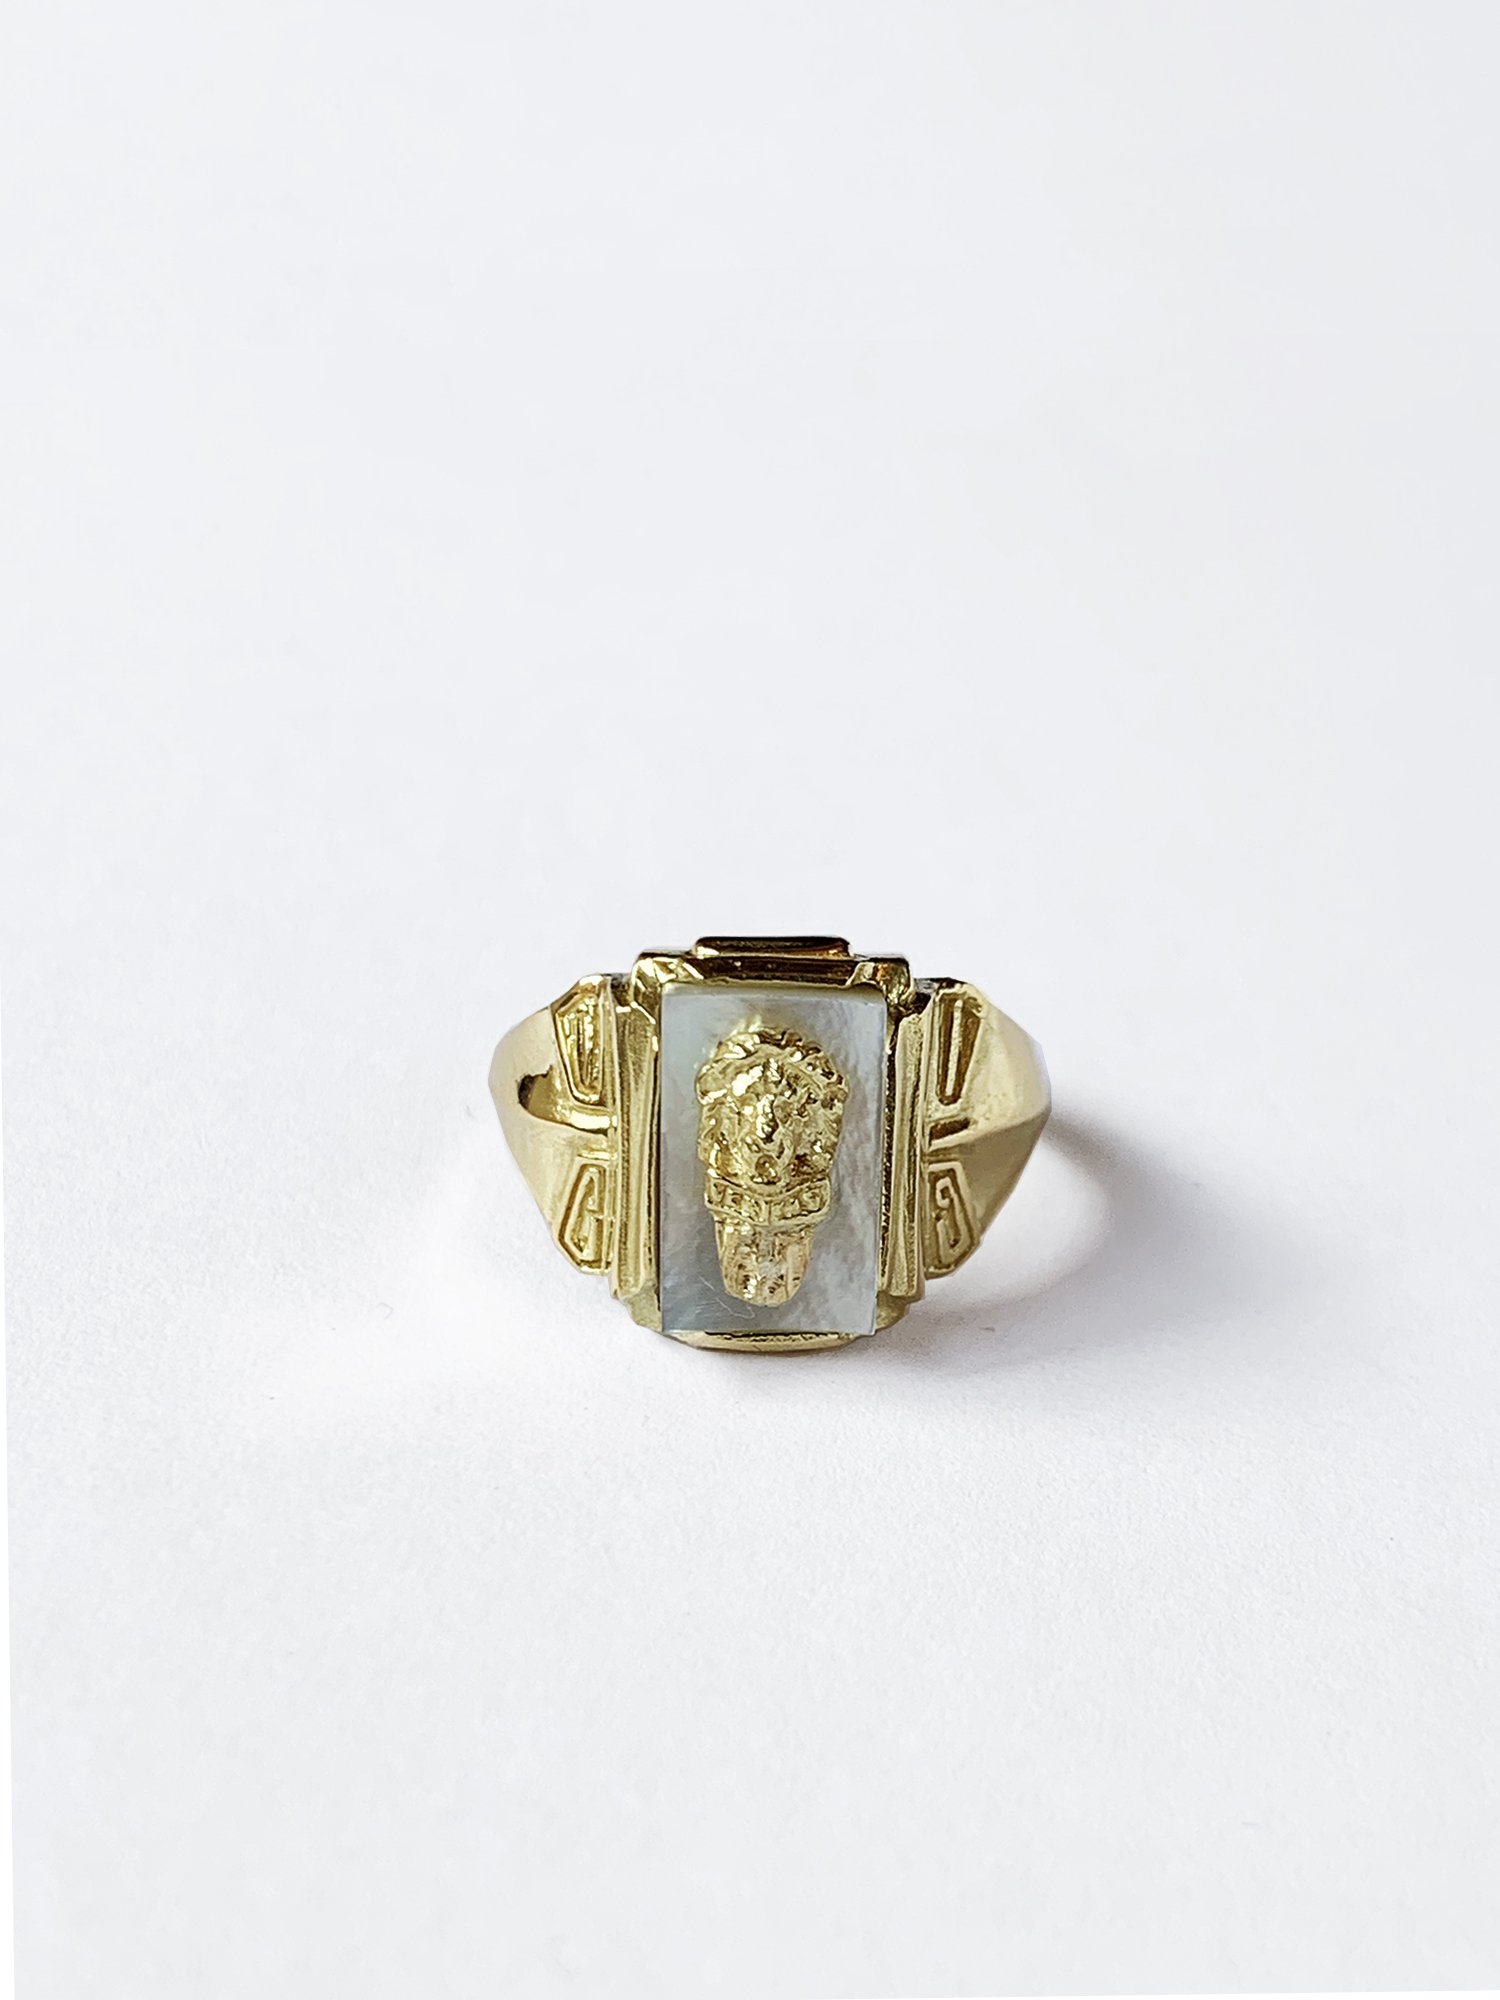 HELIOS / College leo ring / Mother of pearl